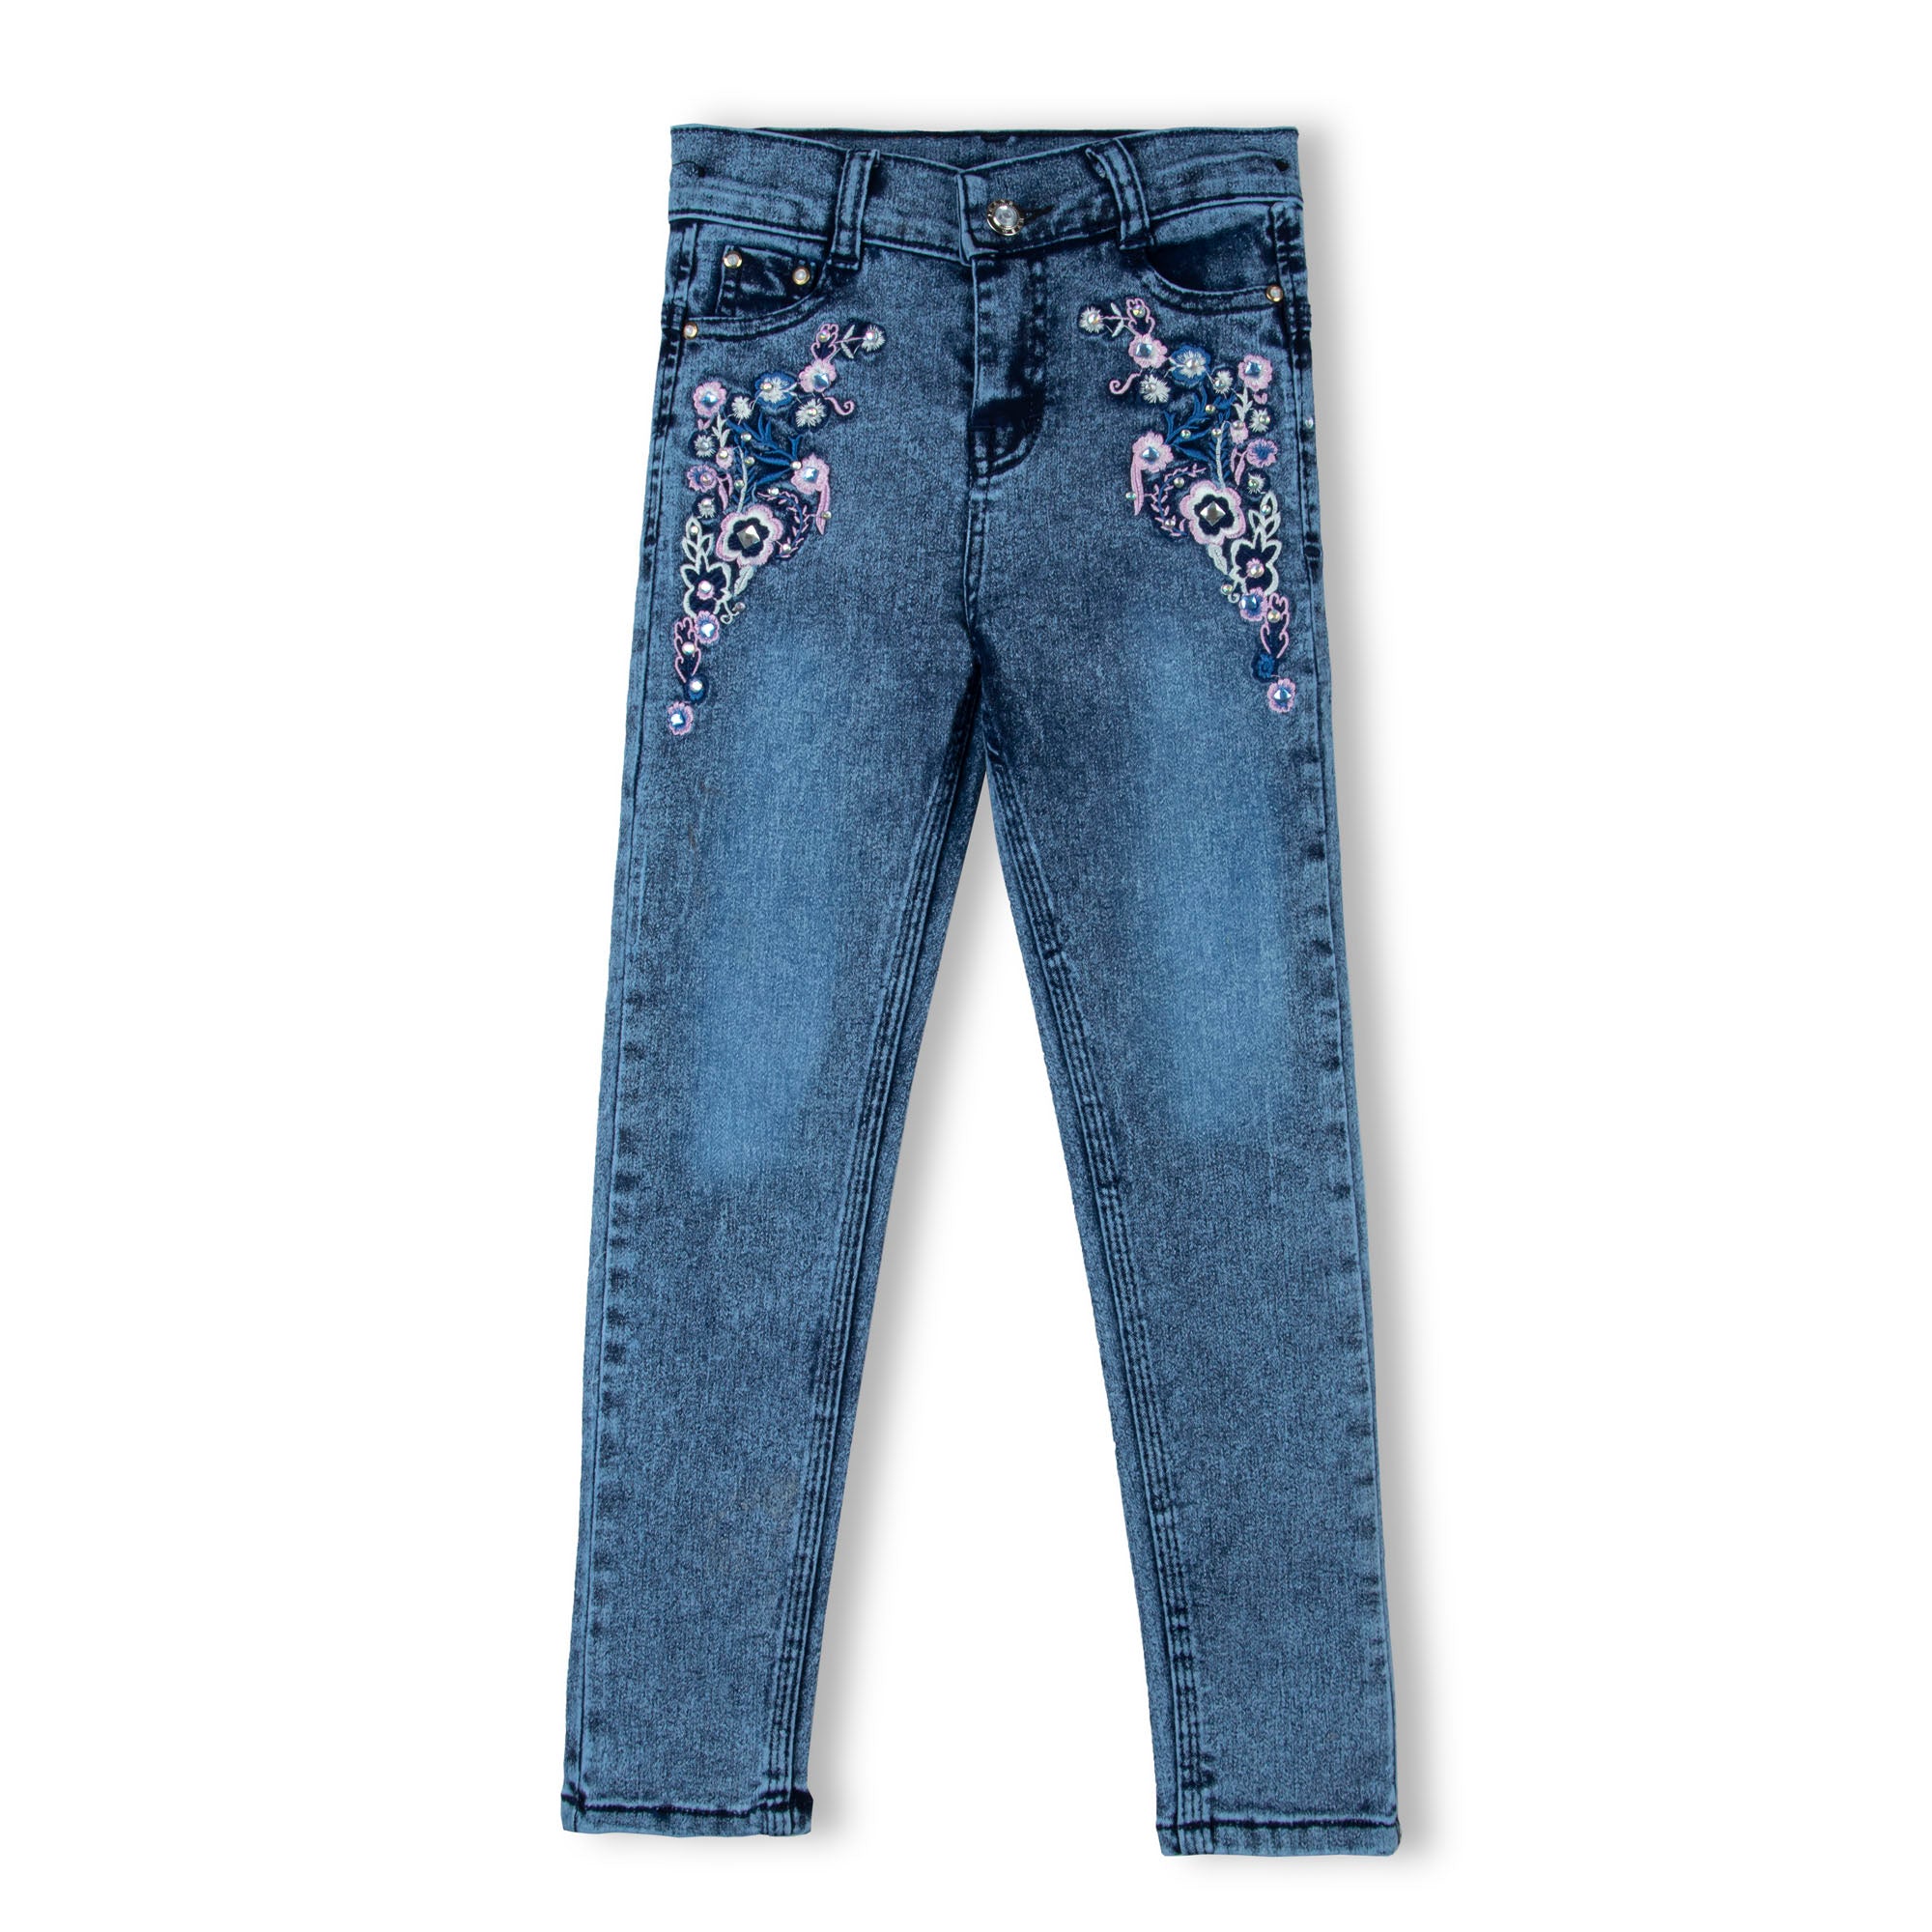 Butterfly Diamontes Jeans